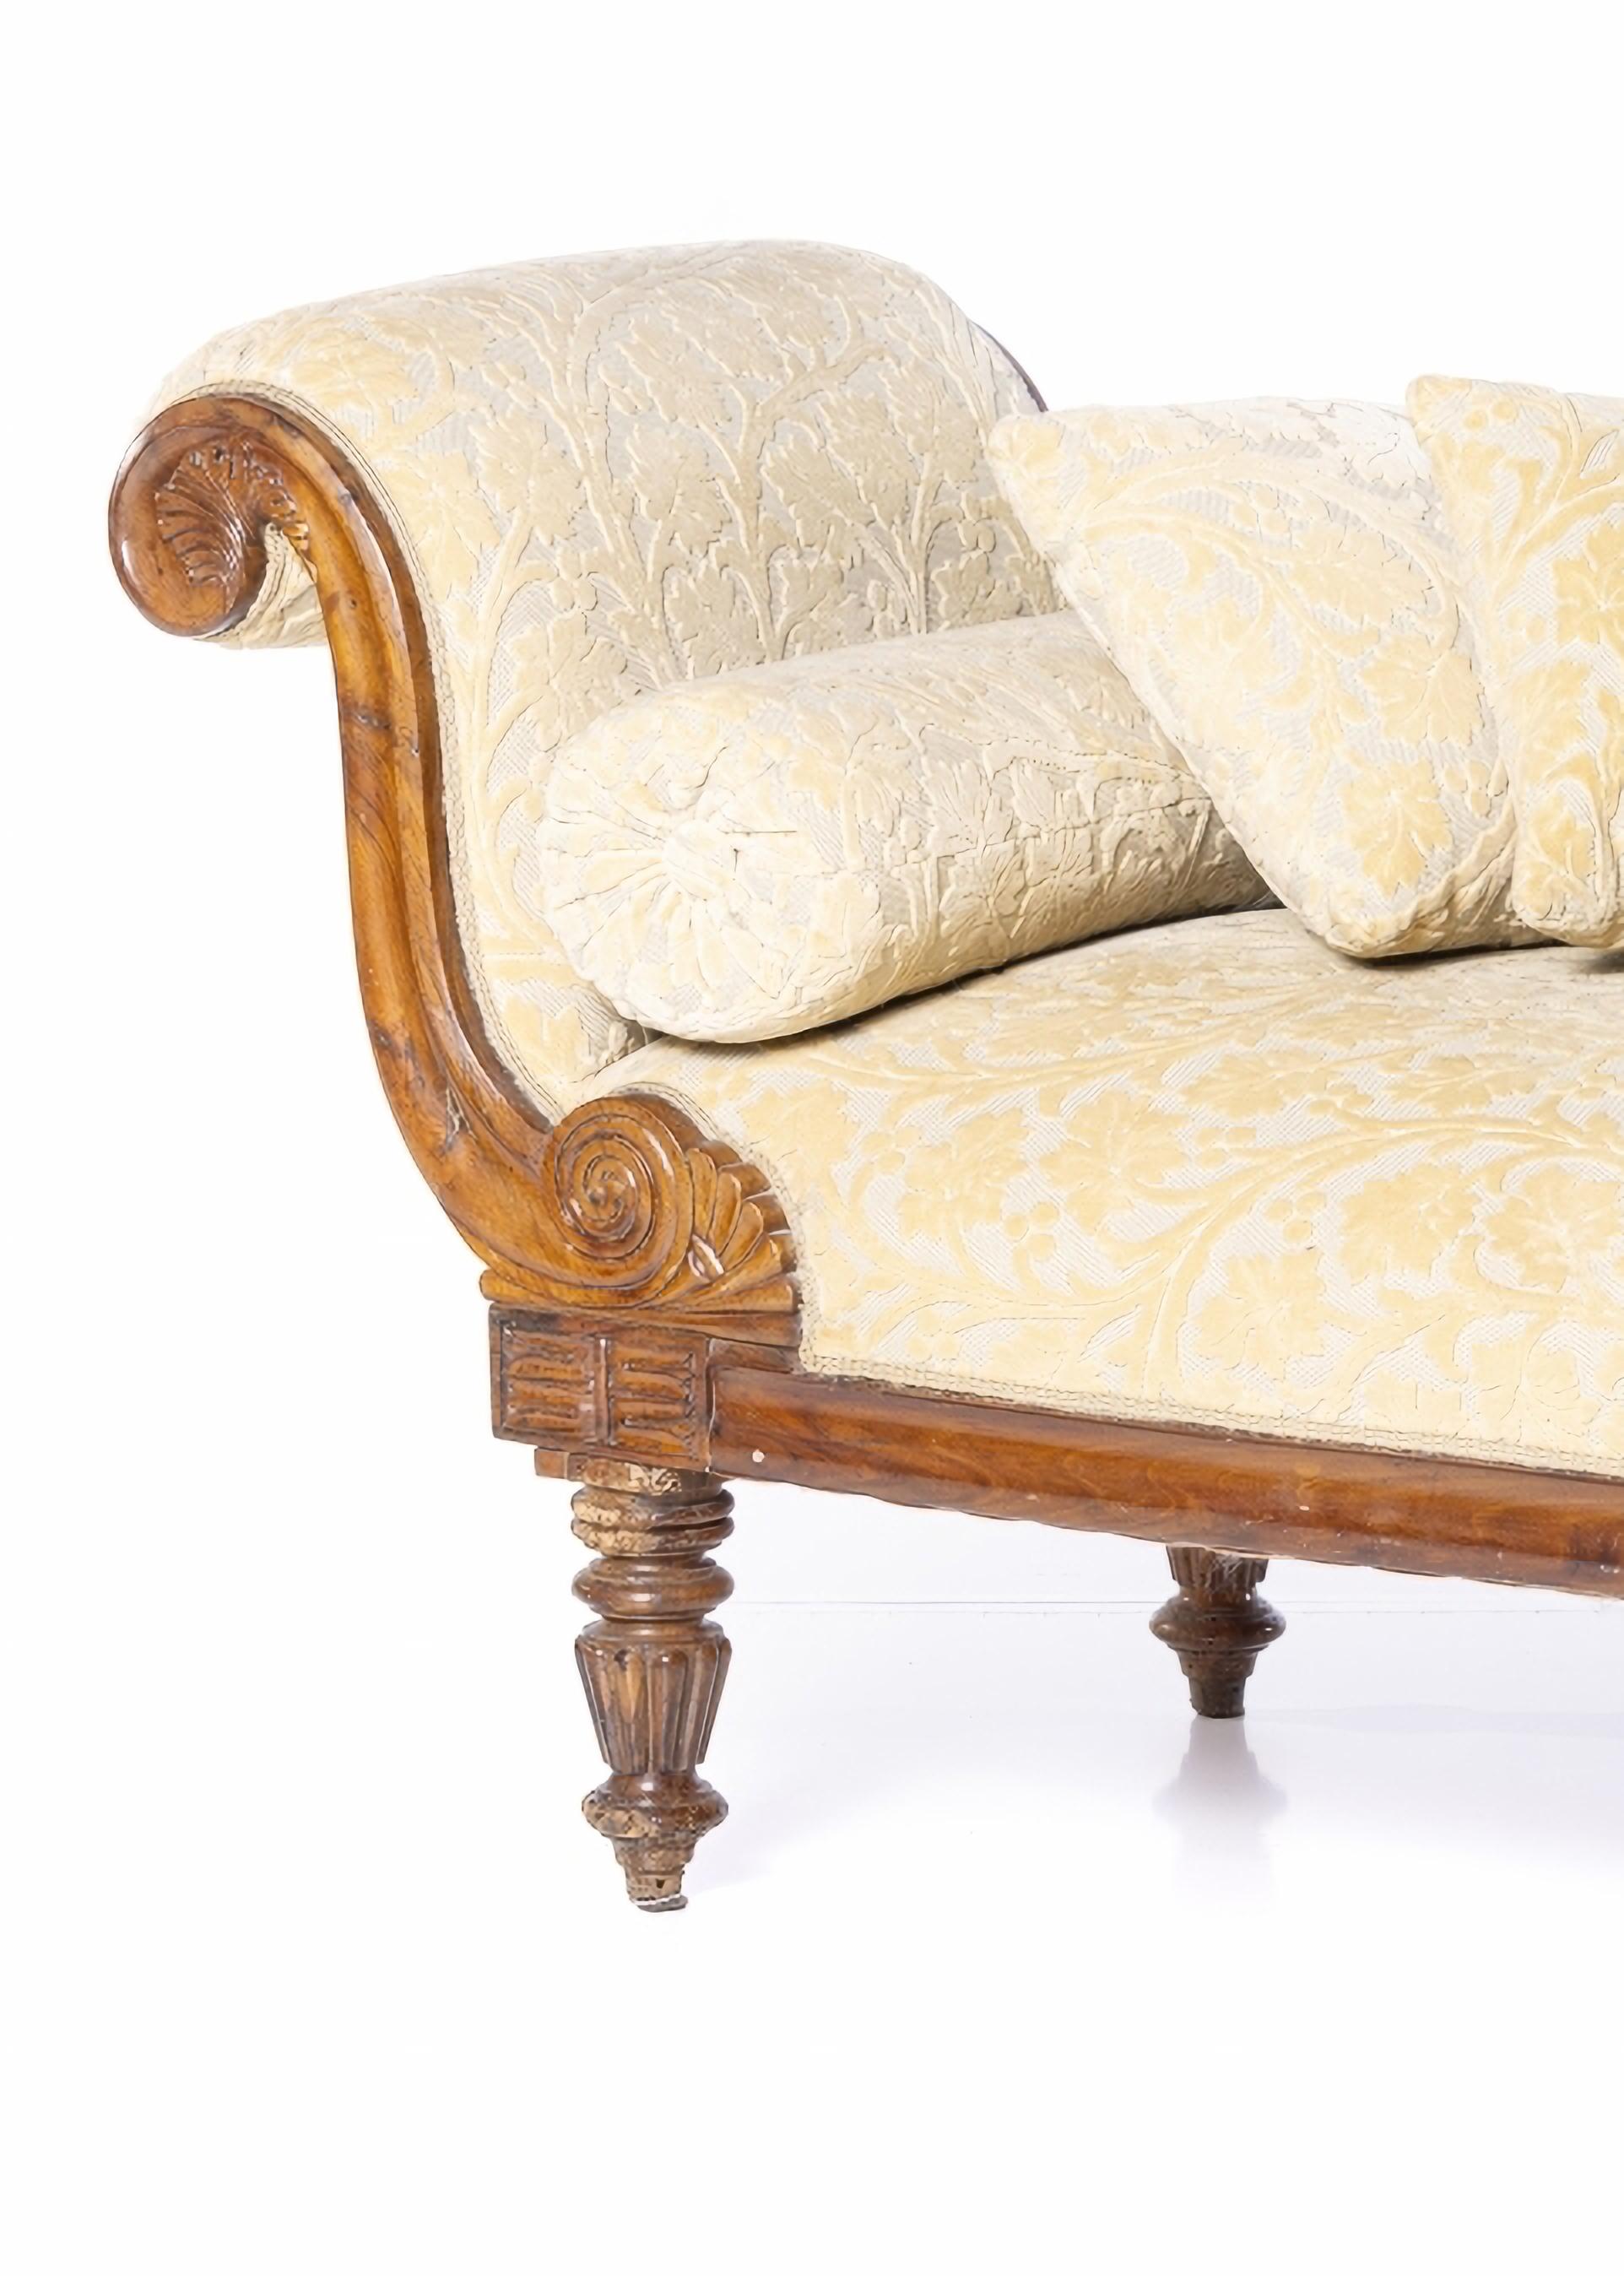 Baroque CHAISE LONGUE  Portuguese, from the 19th Century